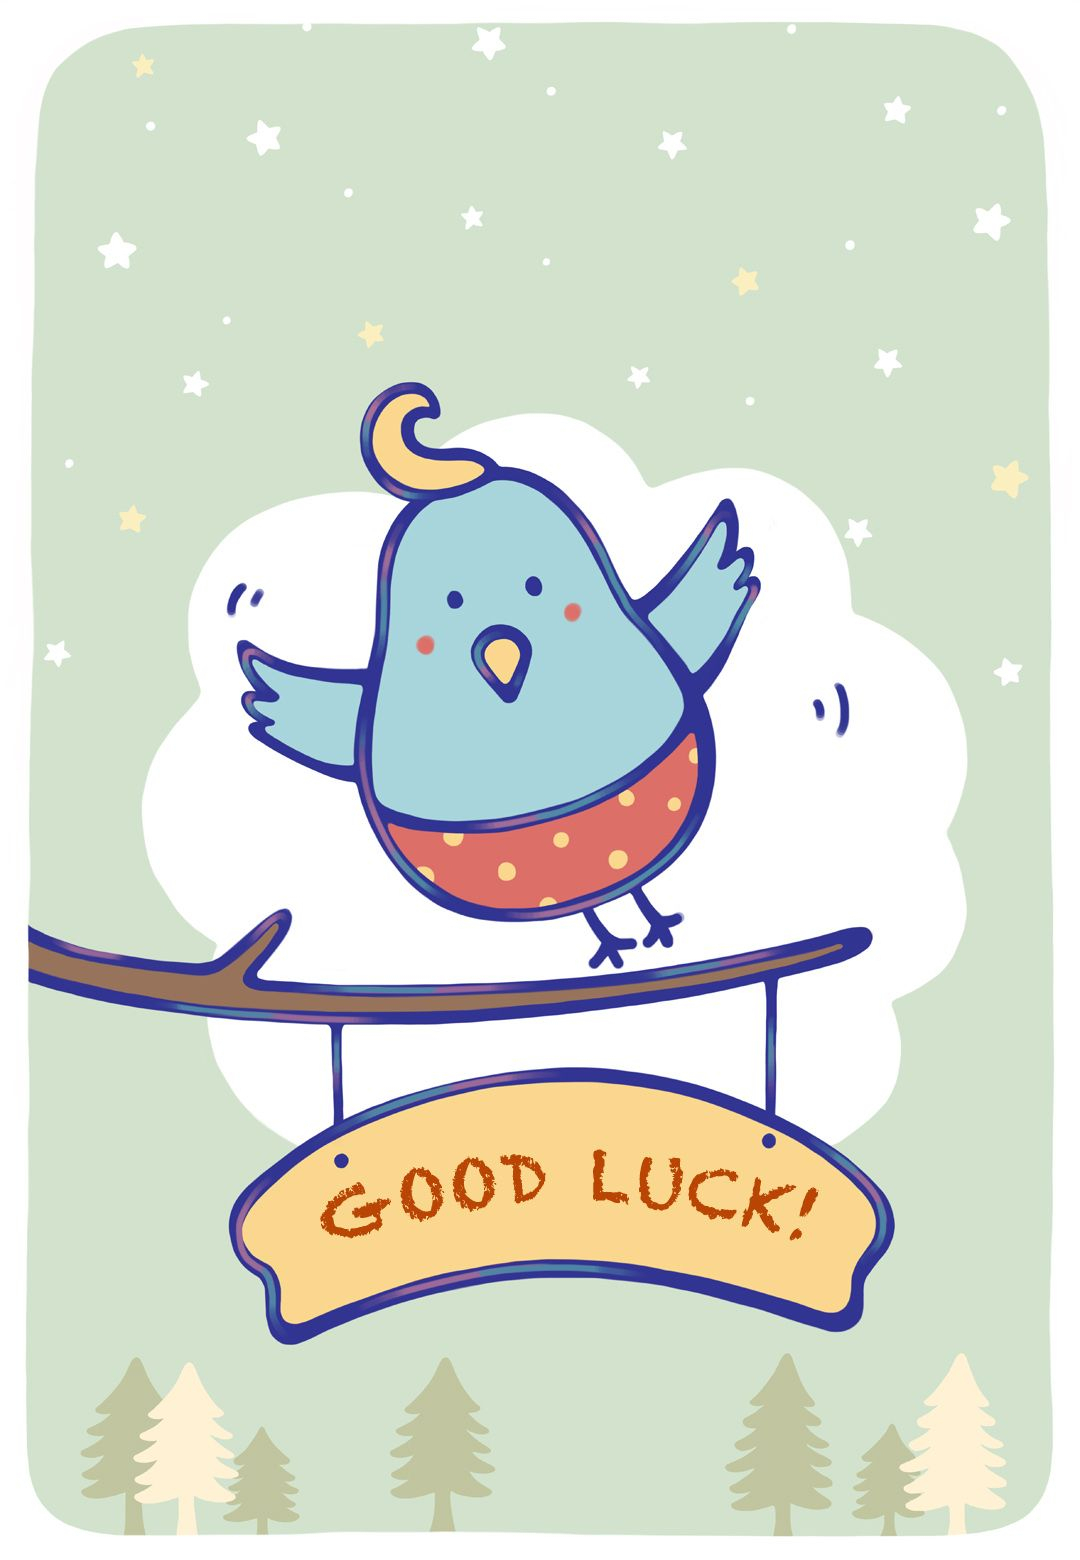 Free Printable Bluebird Of Happiness Greeting Card With Good Luck Card Template